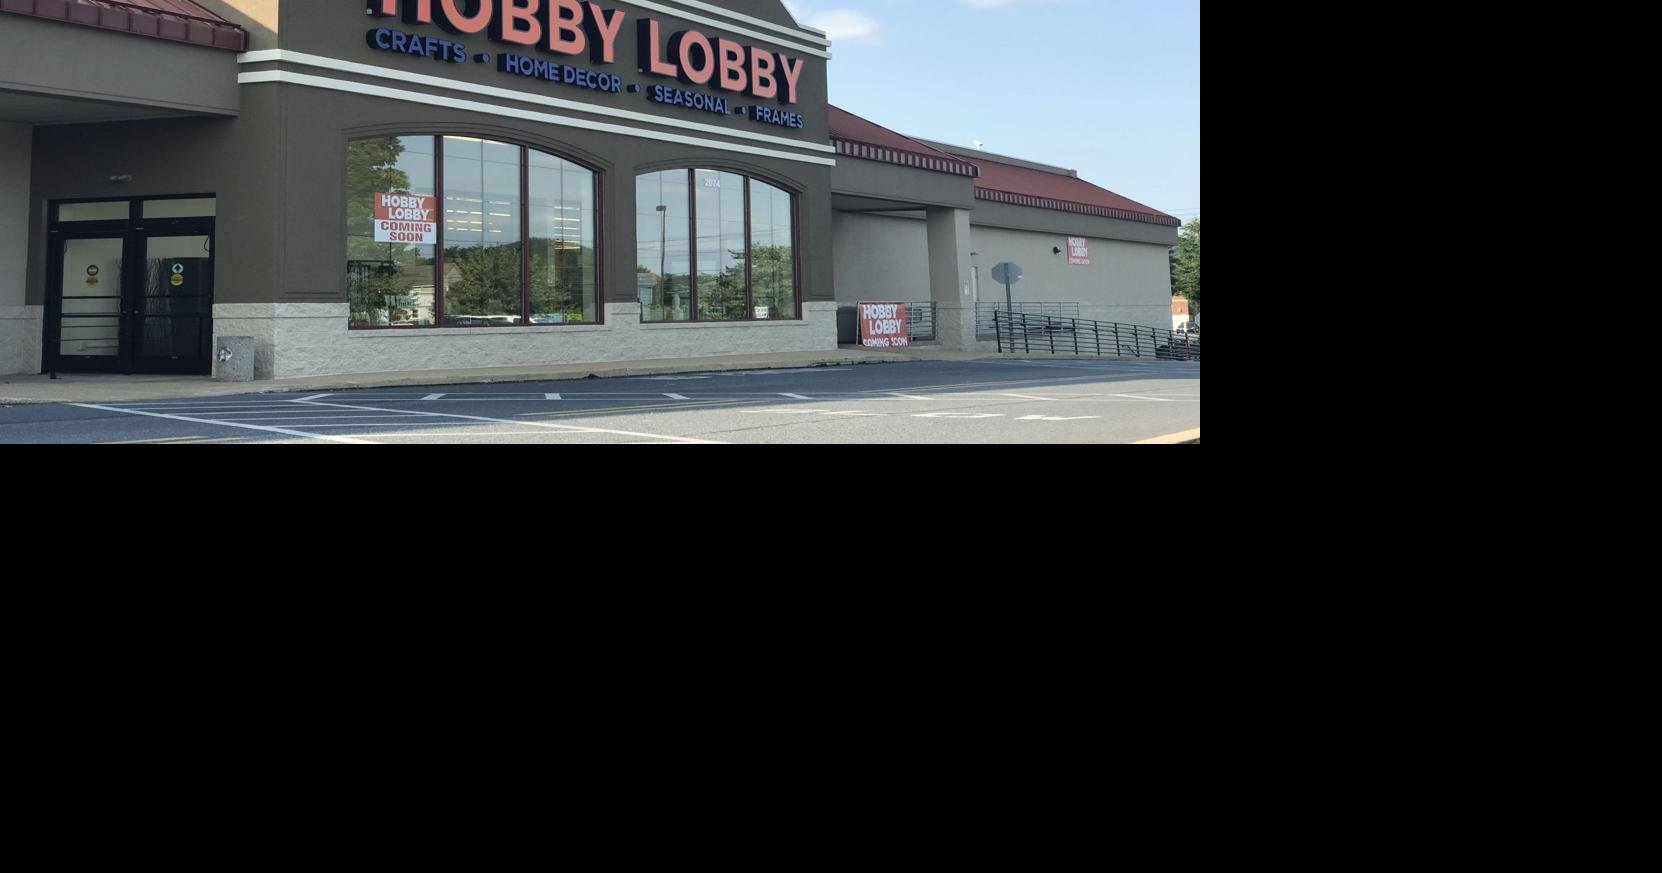 Hobby Lobby to open store in East Lampeter Twp.; 2nd Lancaster County